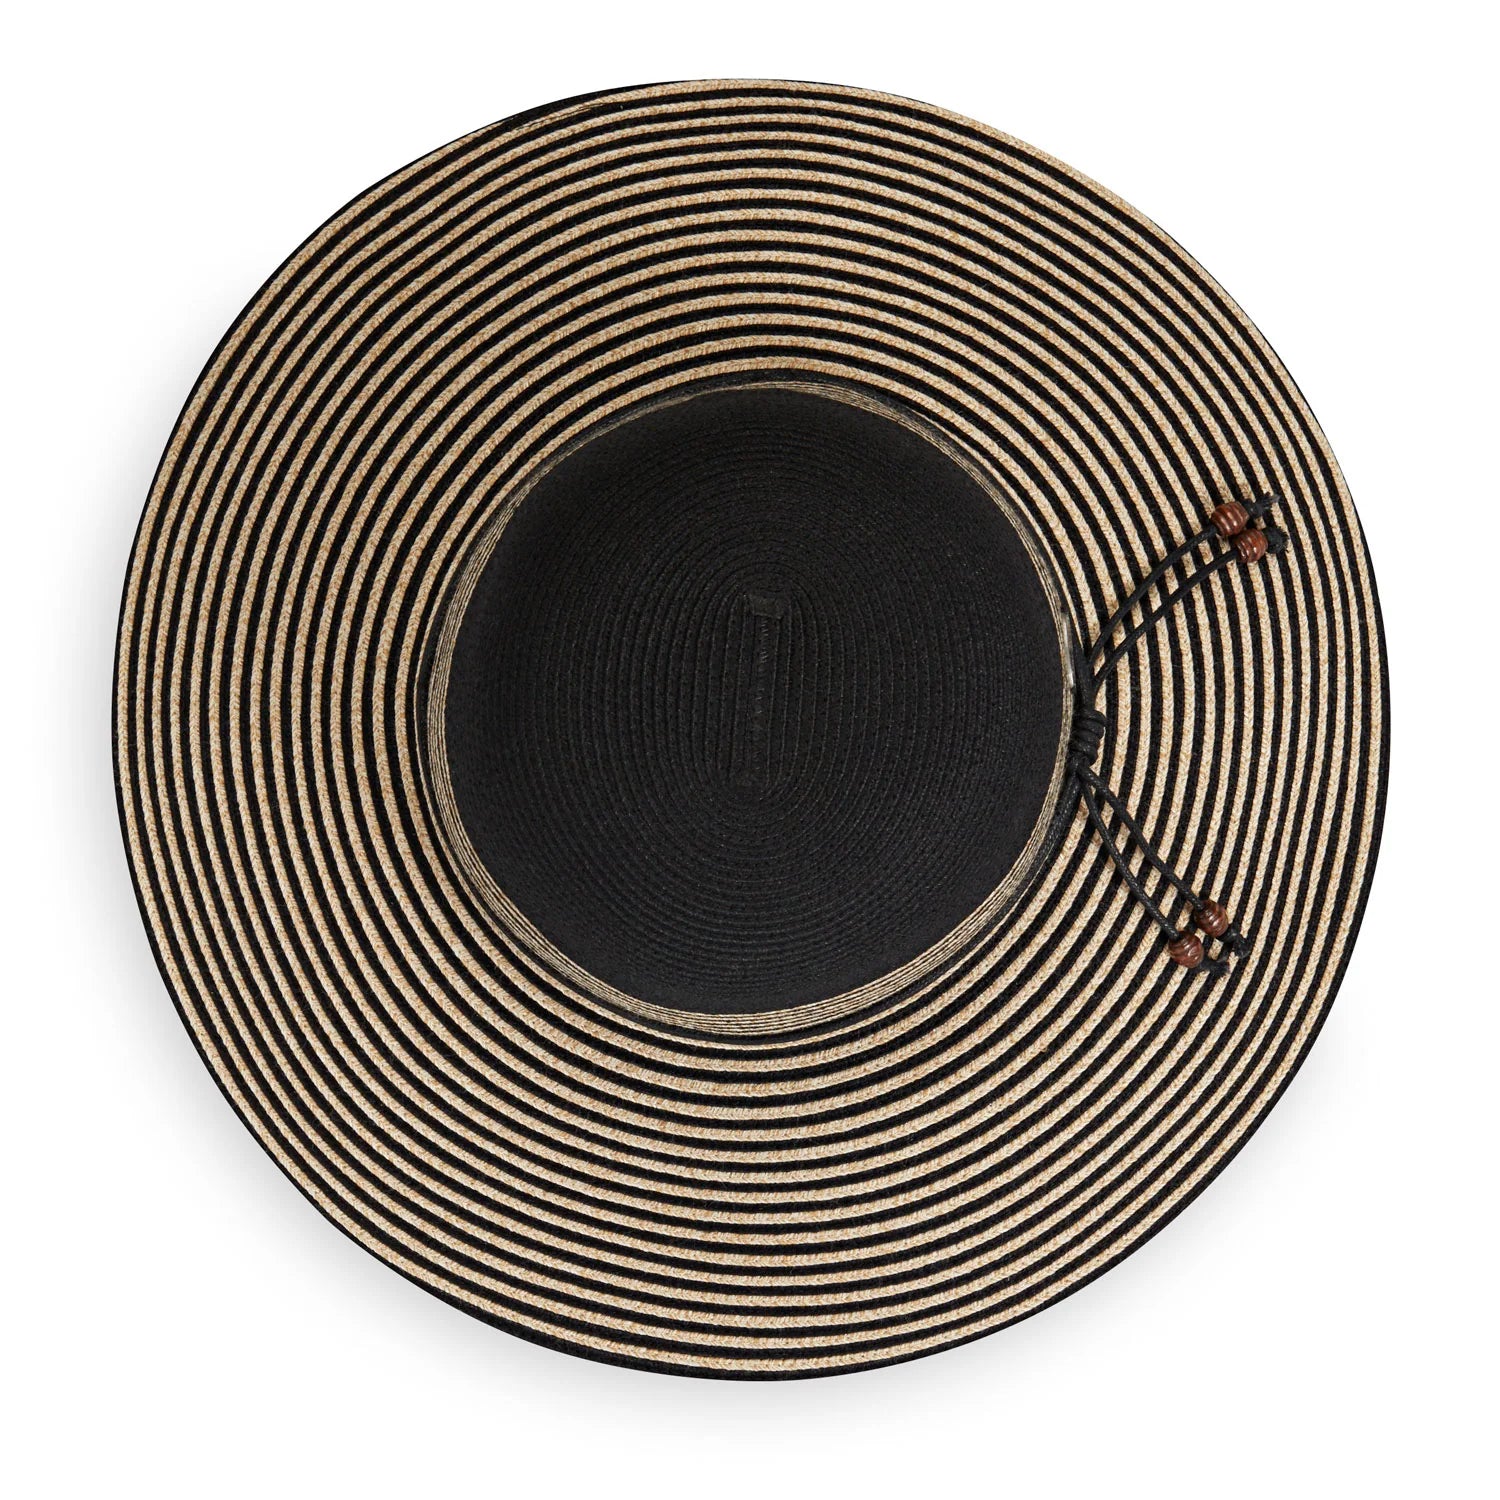 Stripes are always in style. From the beach to the runway, this hat adds a touch of class to any event. Flexi-Weave fabric keeps it looking great.